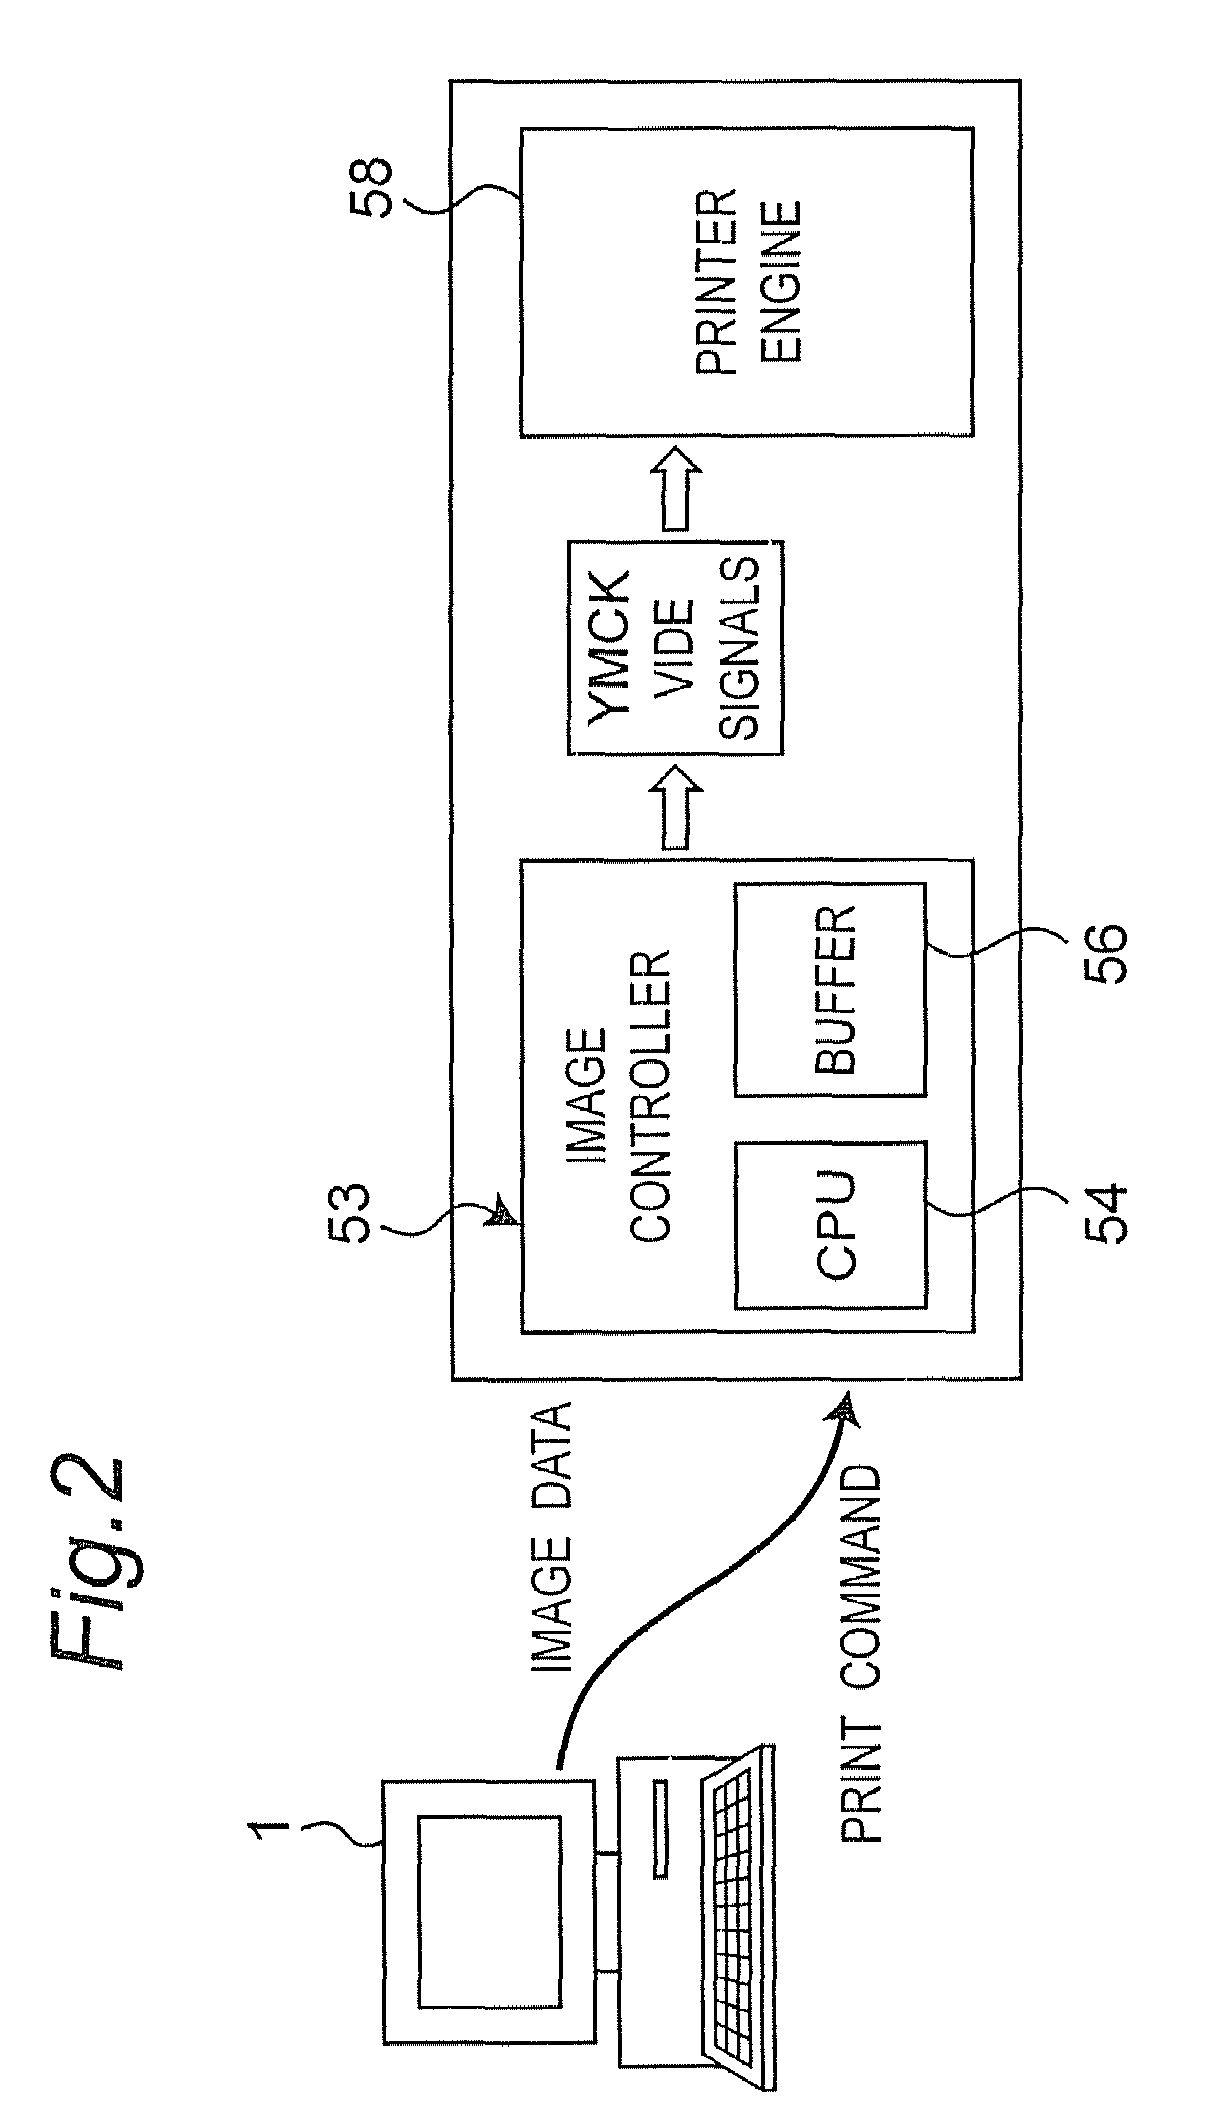 Image forming apparatus having monochrome and color print modes and a plurality of system speeds